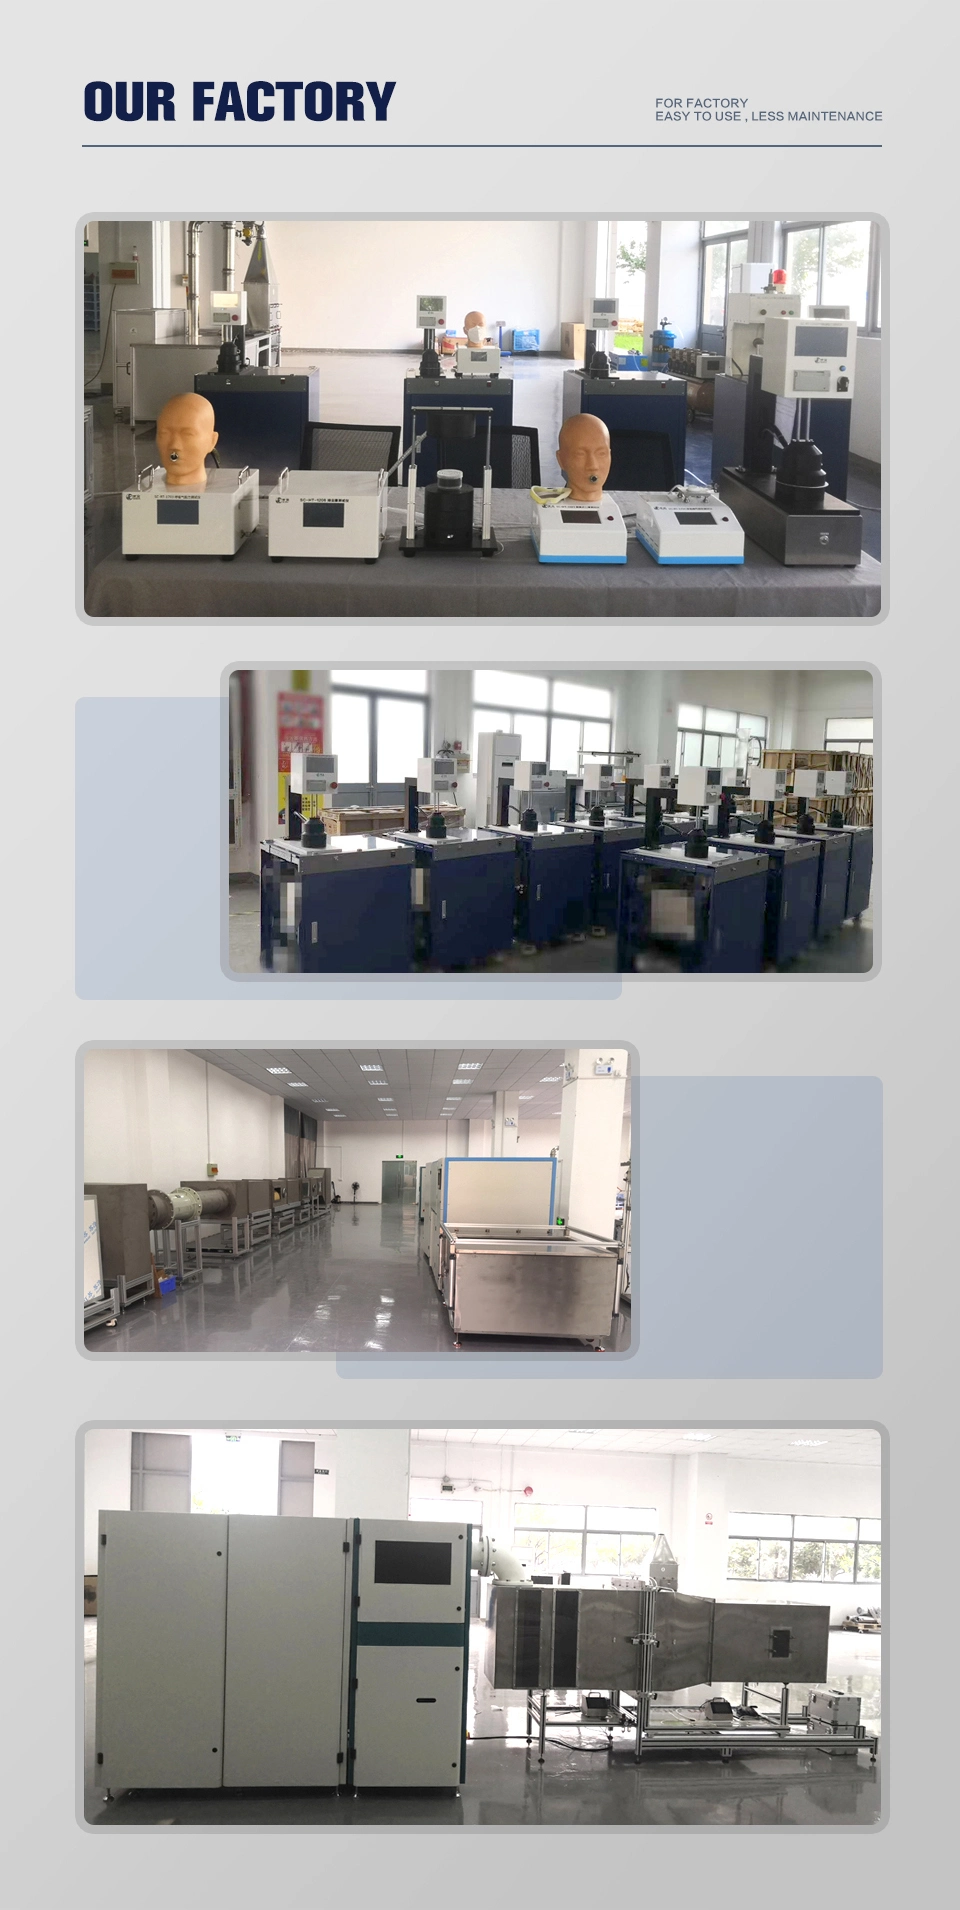 Air Purifier Test Equipment Counting Efficiency, Resistance and Flow Rate-Resistance Curve Testing